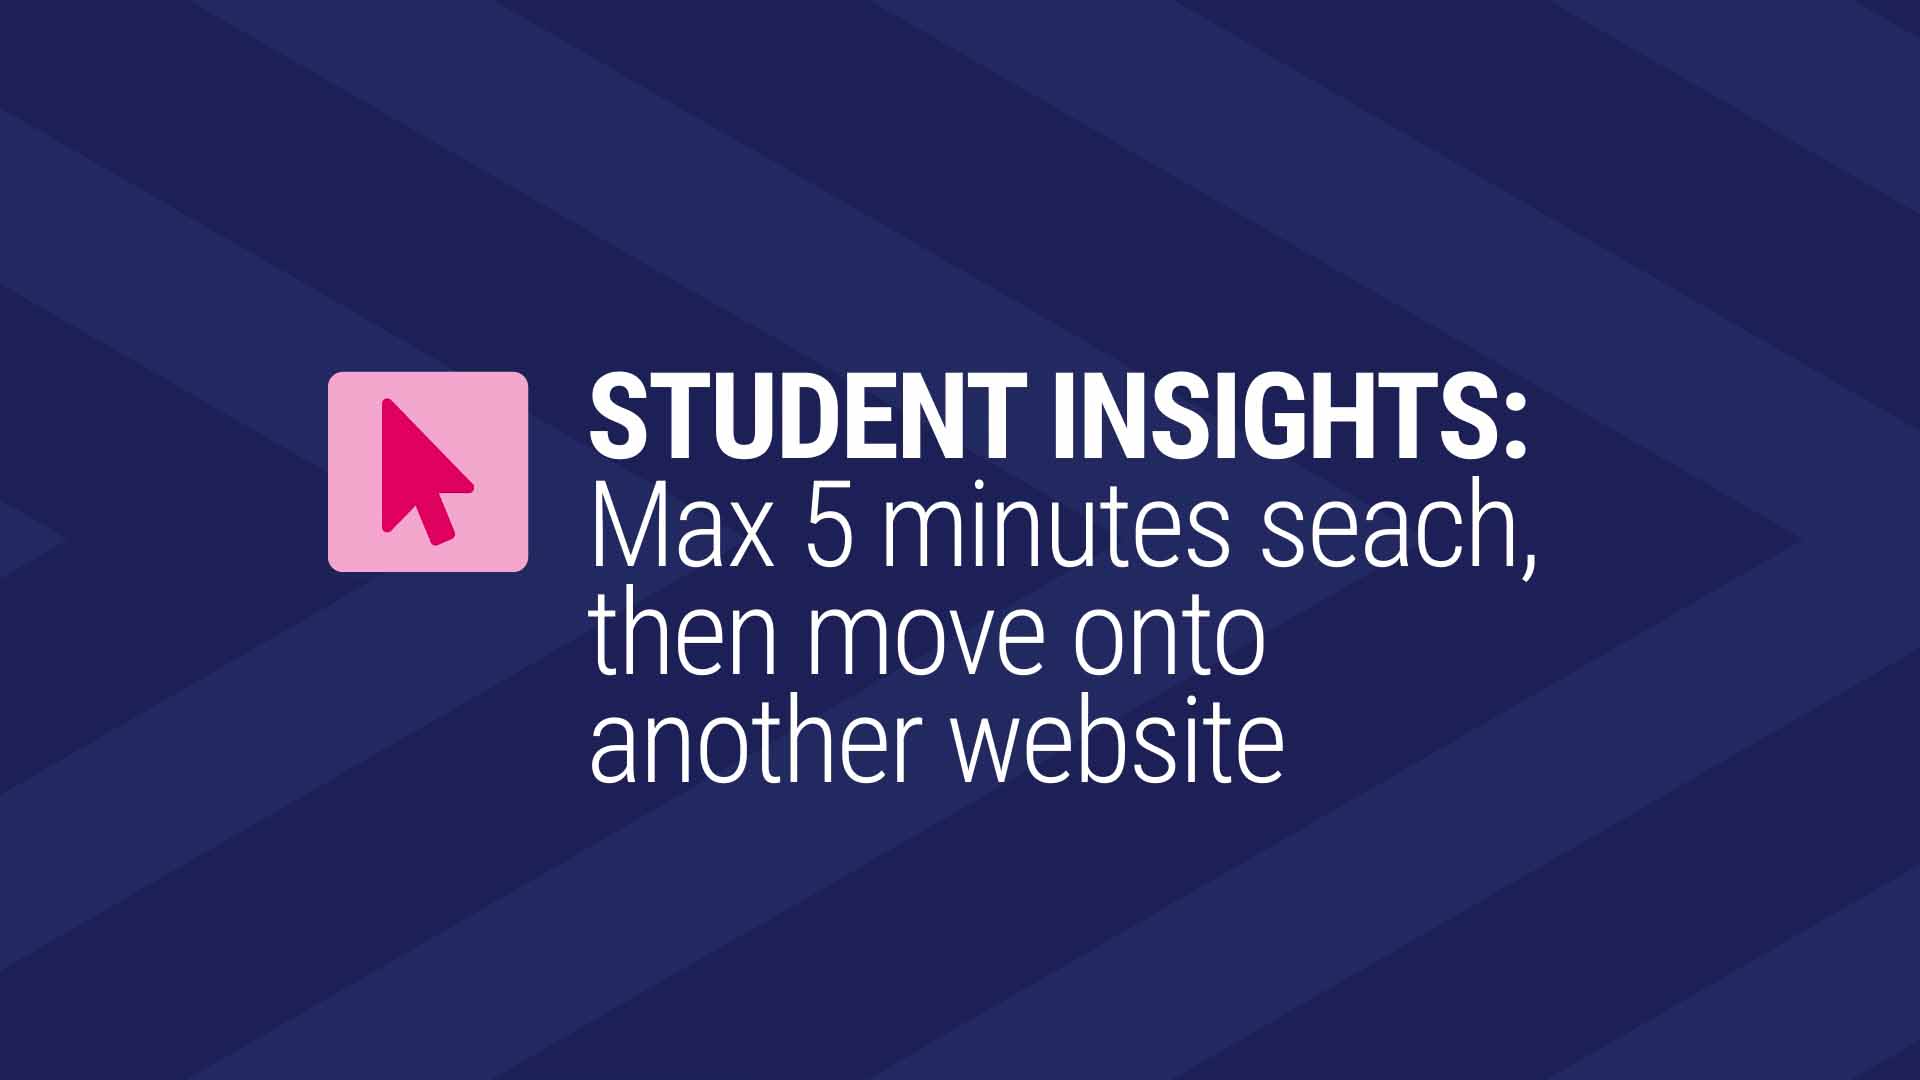 Card image for "18 - Student Insights: 5 Min Search"